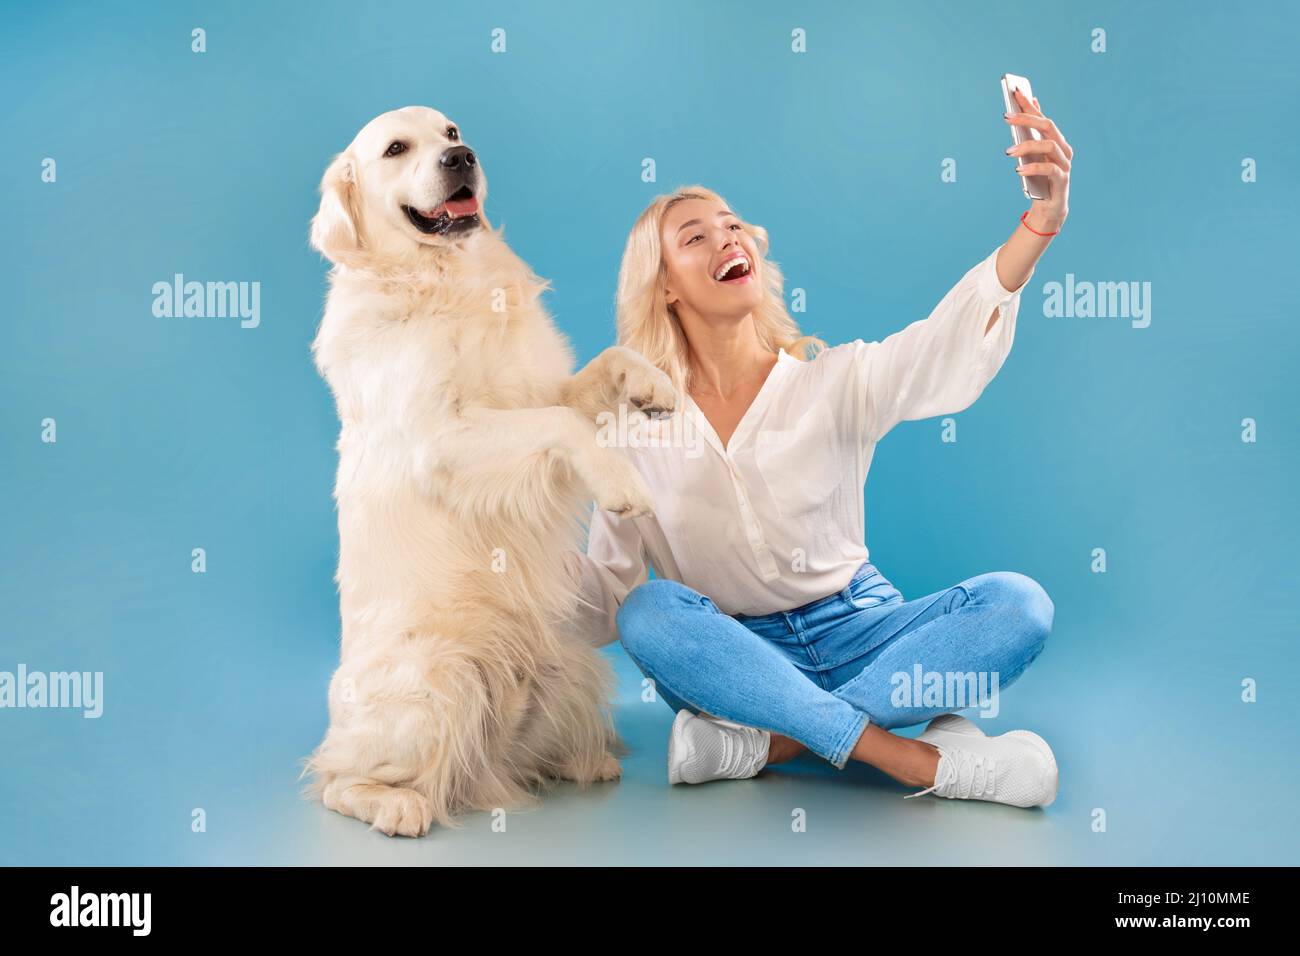 Young woman taking selfie with her dog Stock Photo